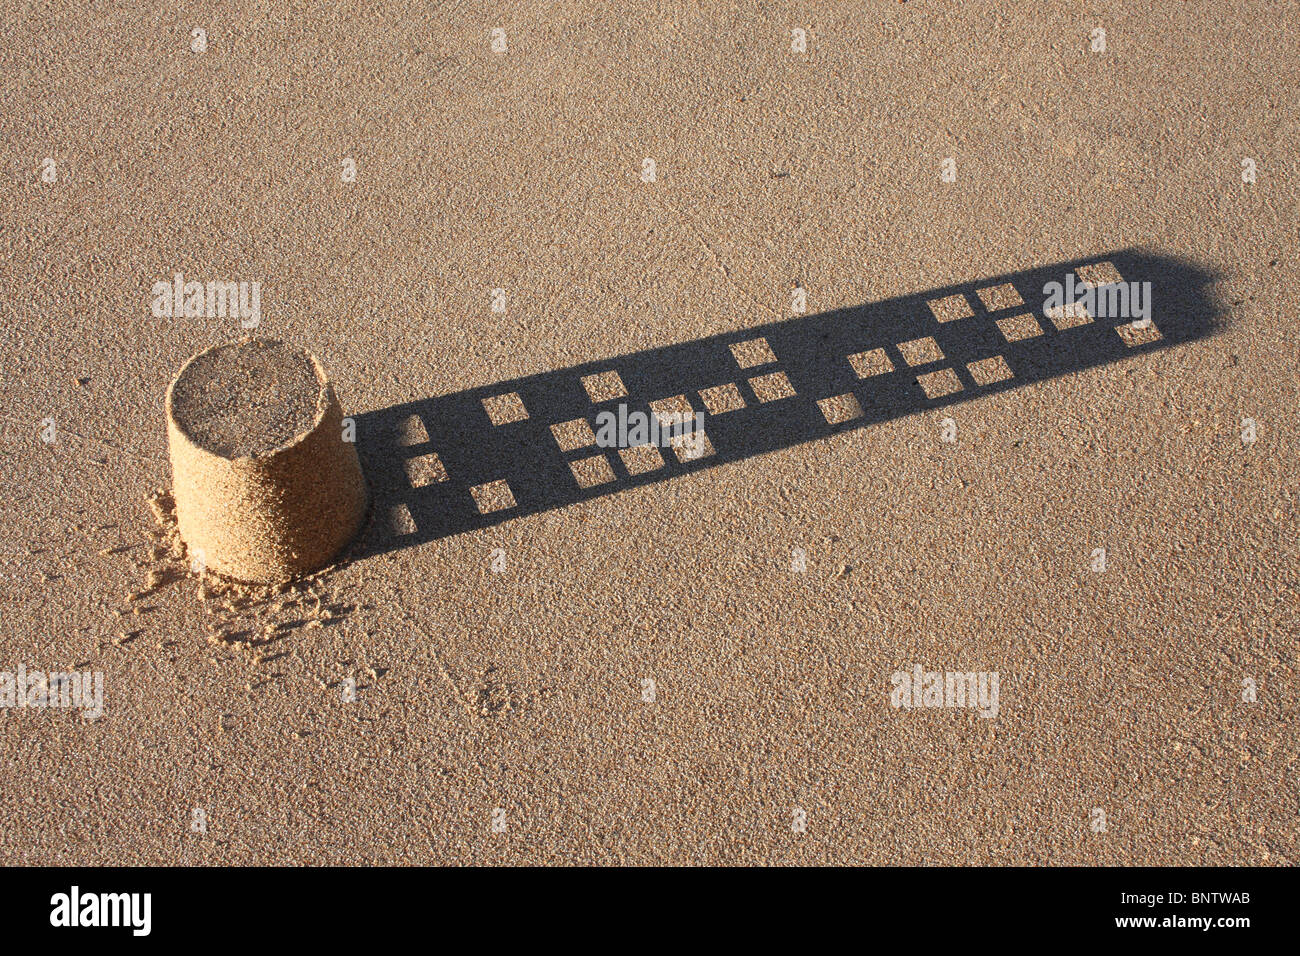 A small sandcastle with a skyscraper of a shadow. Stock Photo